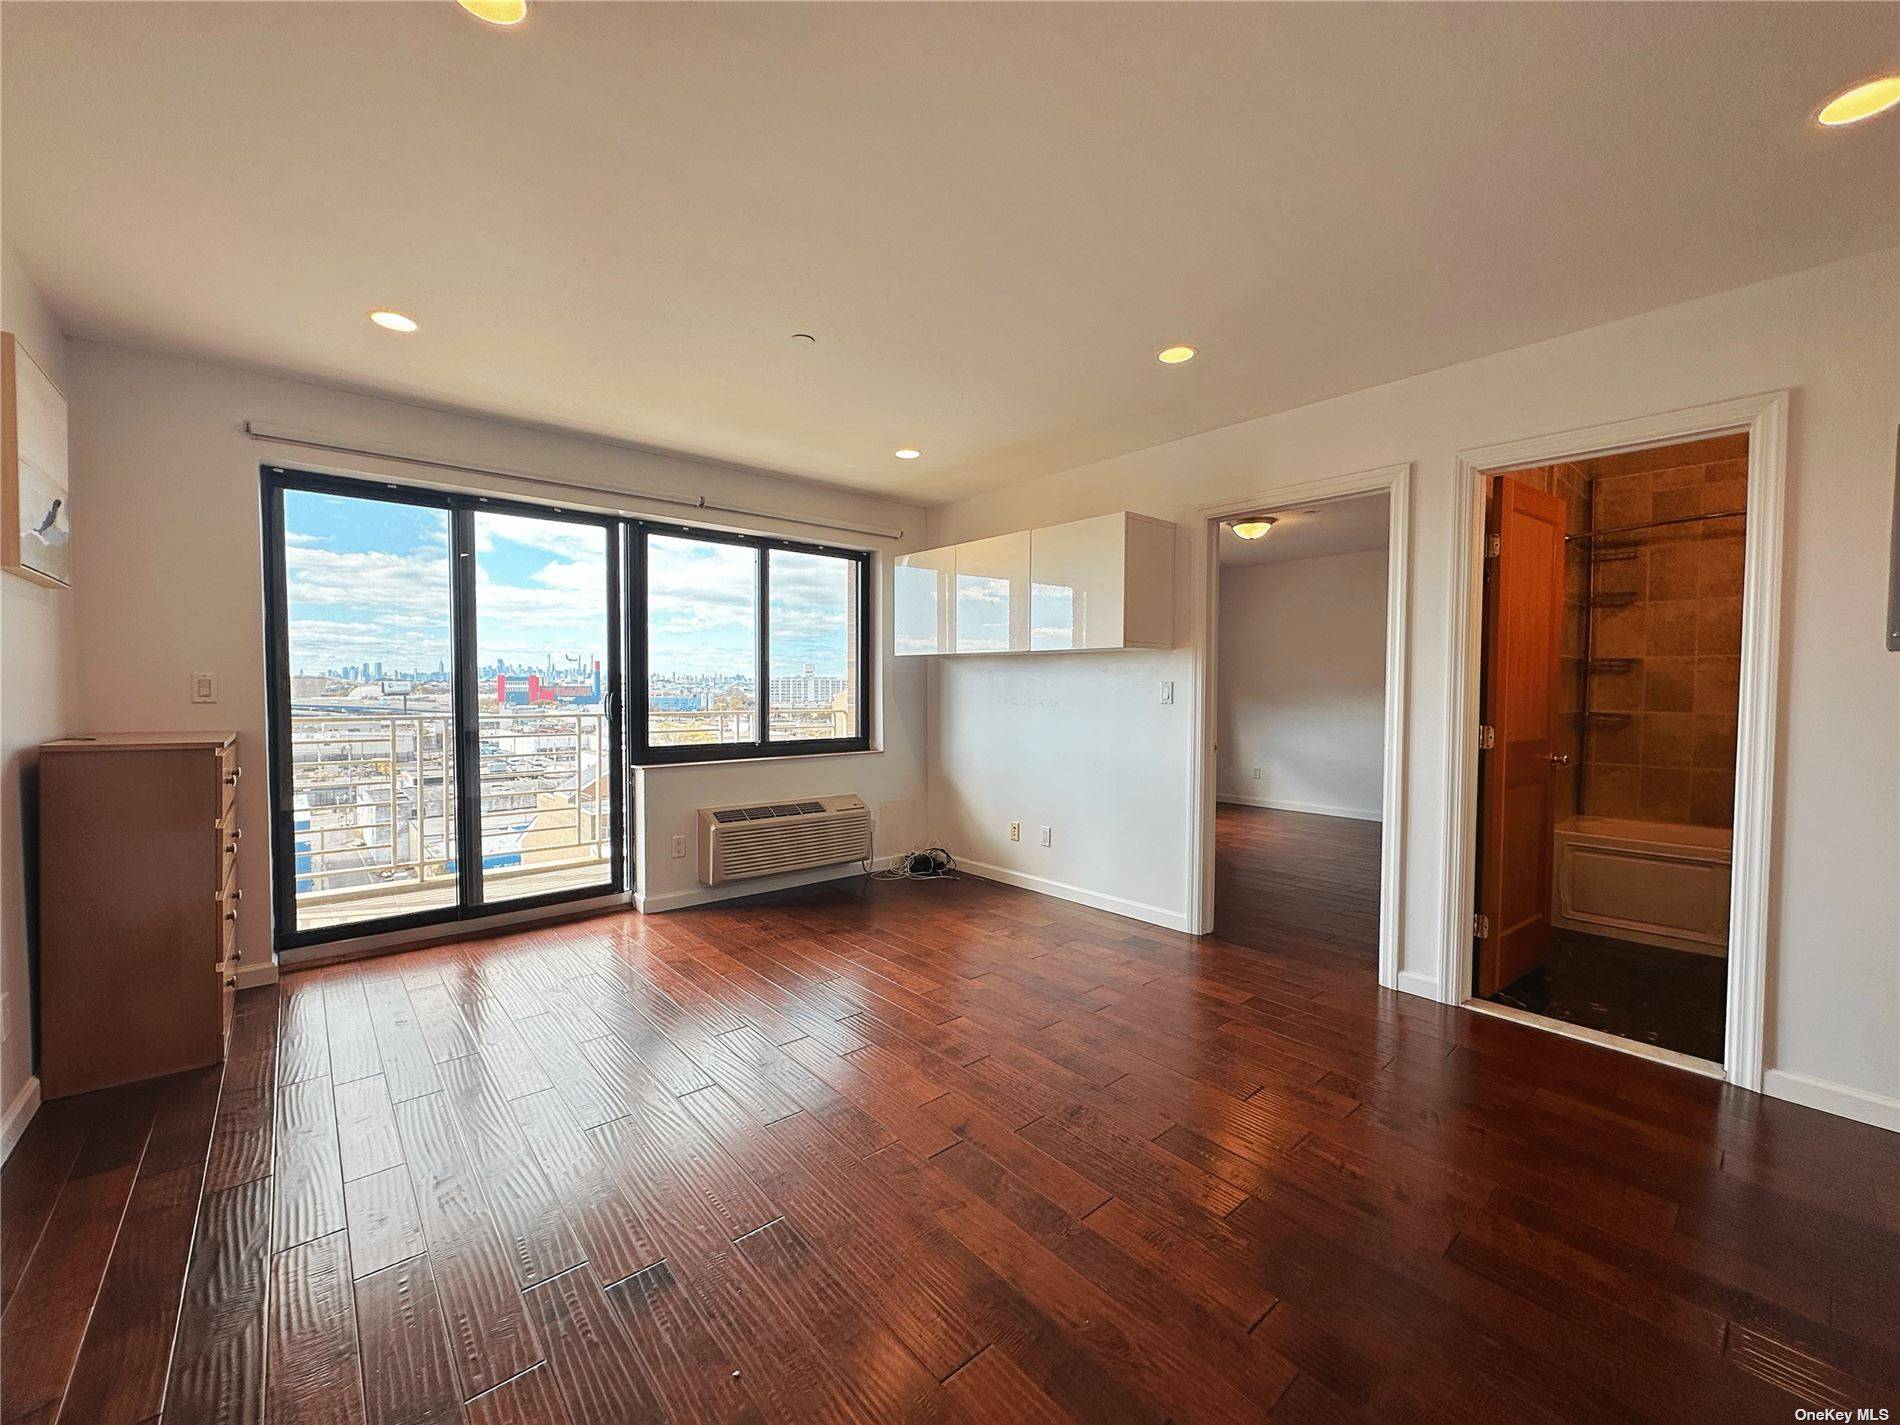 Welcome to Flushing's 2 bedroom and 2 bath condo on 8th floor.